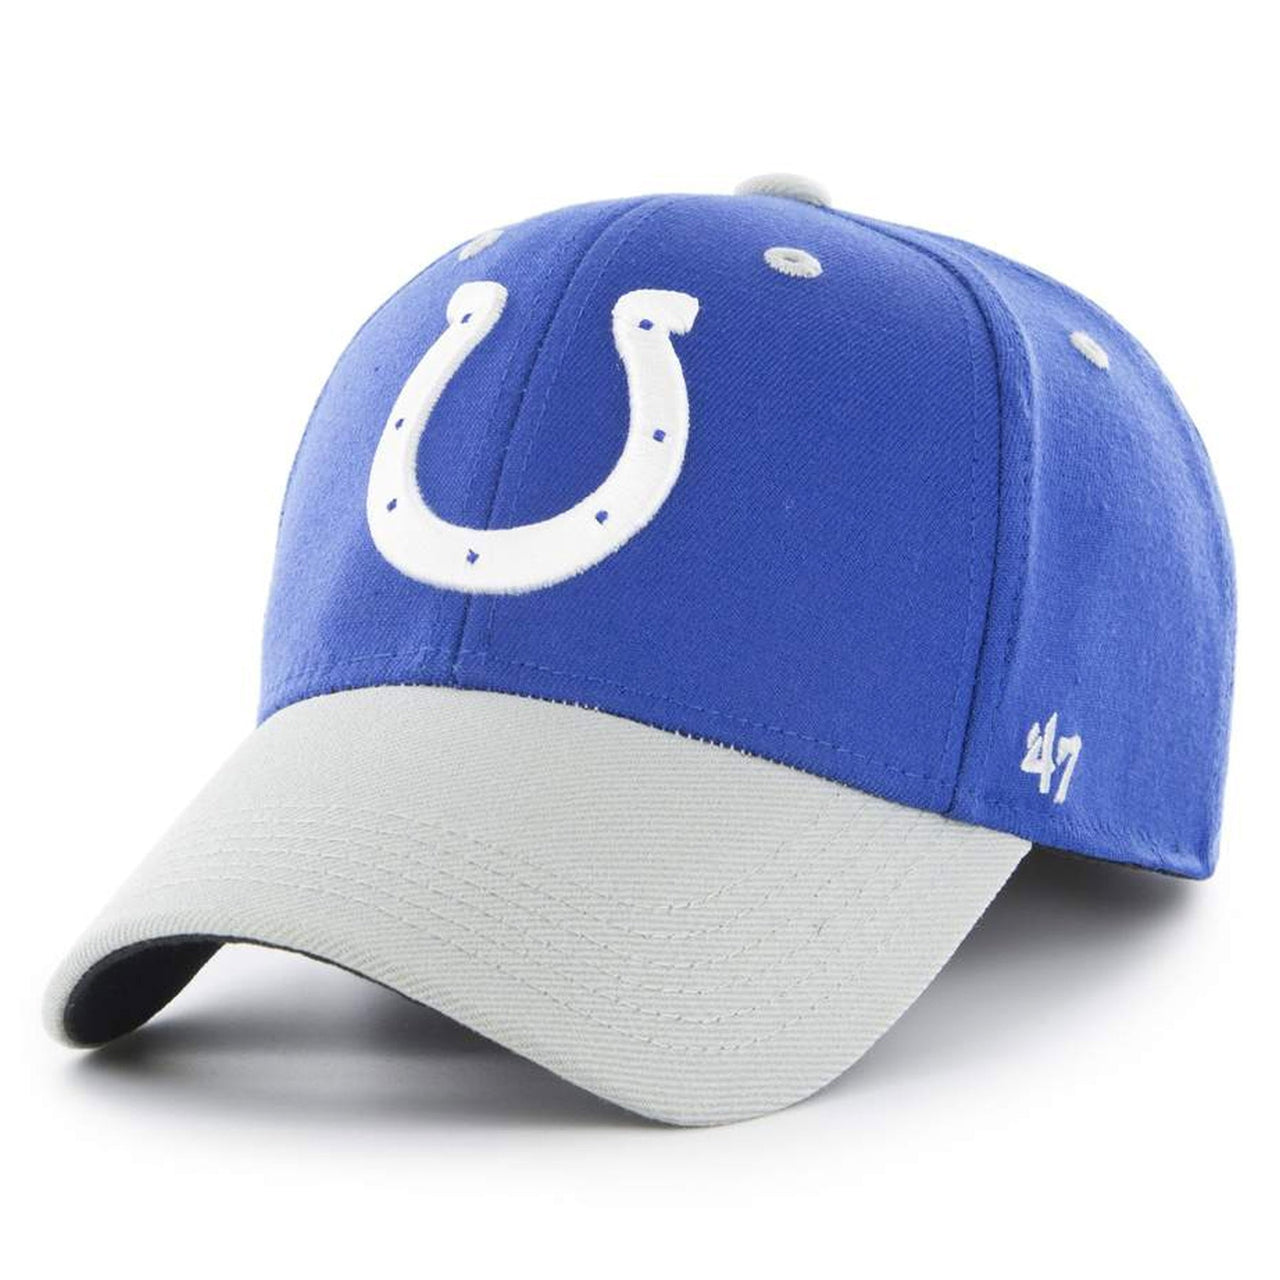 The Indianapolis Colts one size fits all stretch fit cap features the Indianapolis Colts horseshoe logo embroidered on the front in white and royal blue